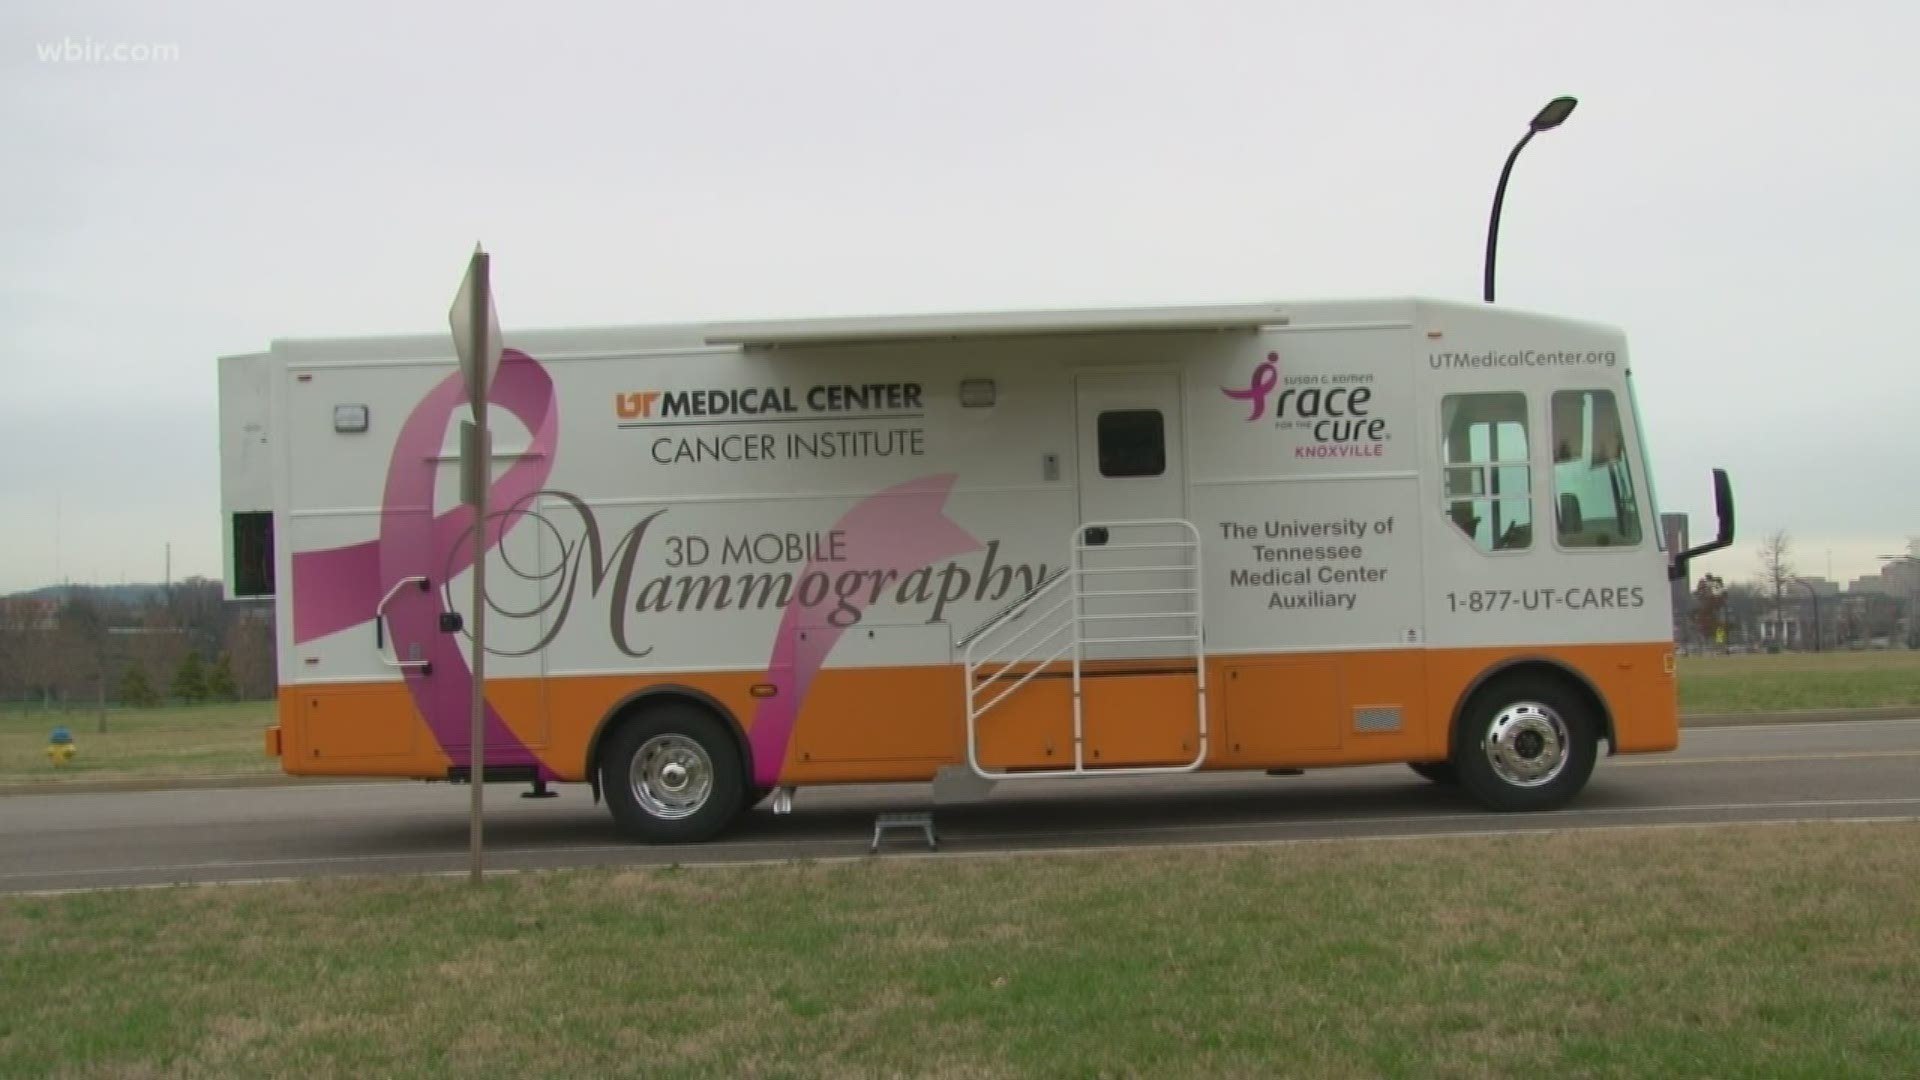 Many East Tennessee counties don't have mammography or 3D breast imaging equipment and the women who live there may not be able to travel to get tested.